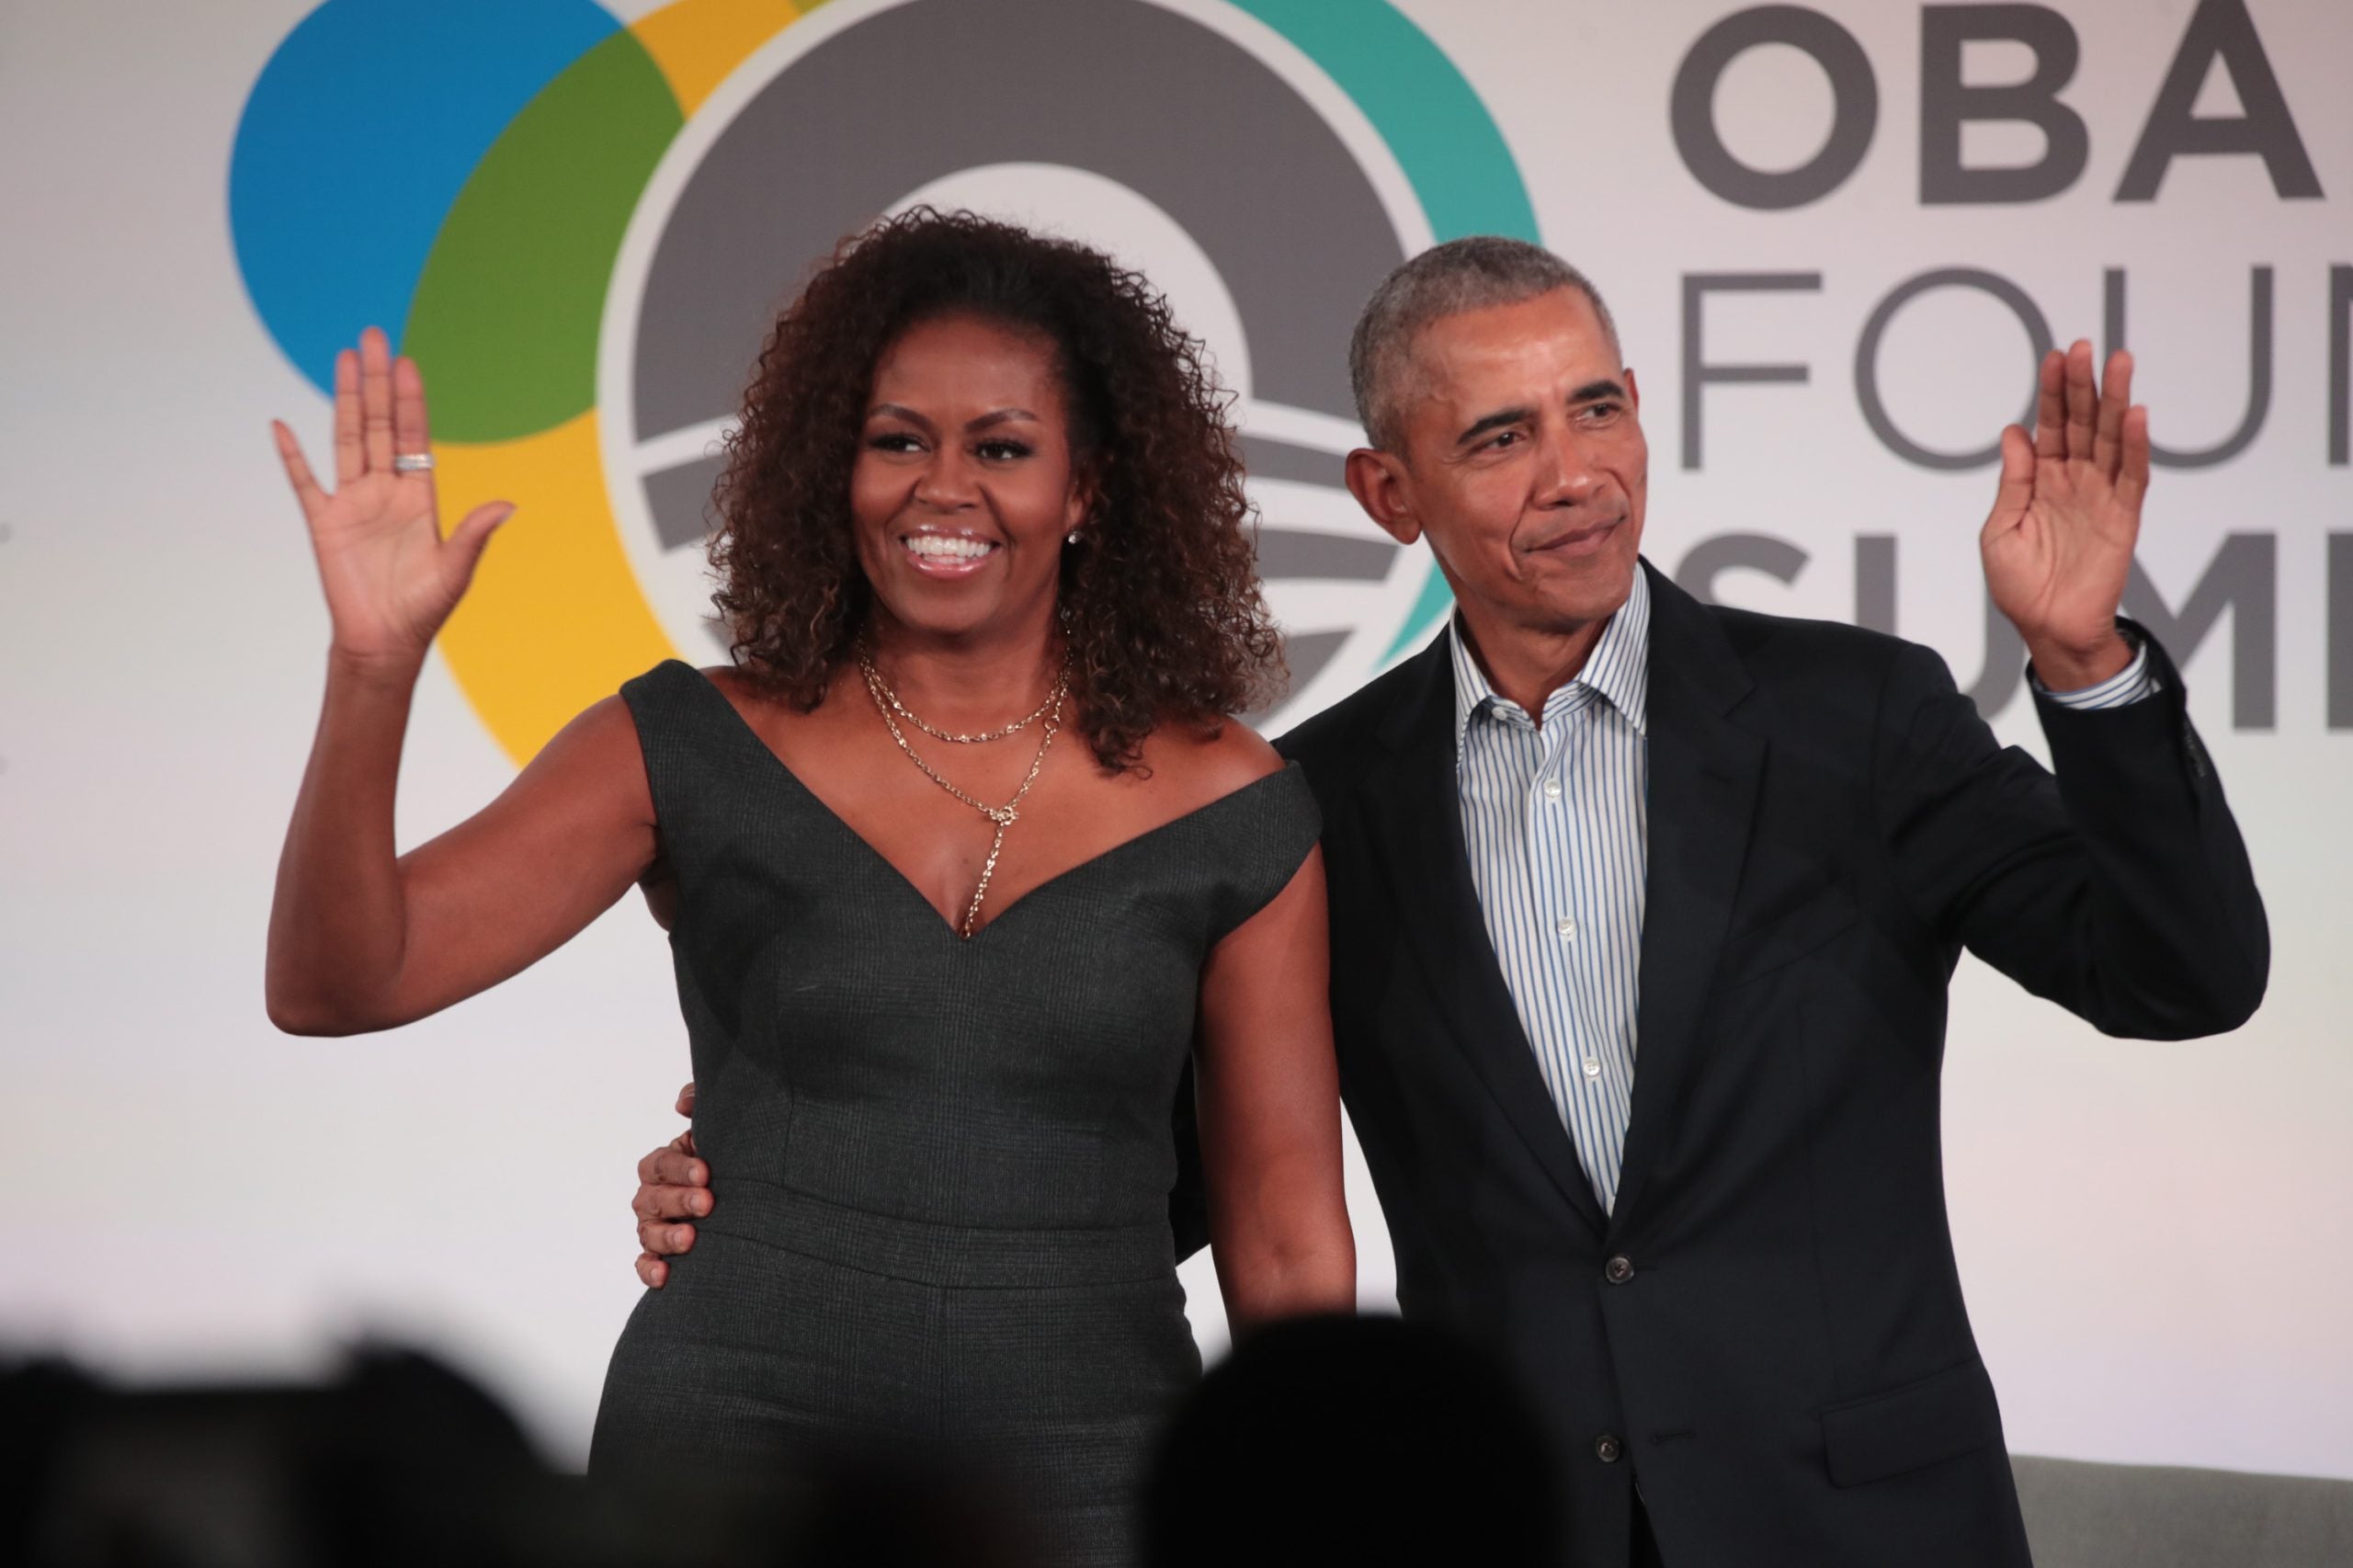 Barack and Michelle Obama To End Podcast Deal With Spotify